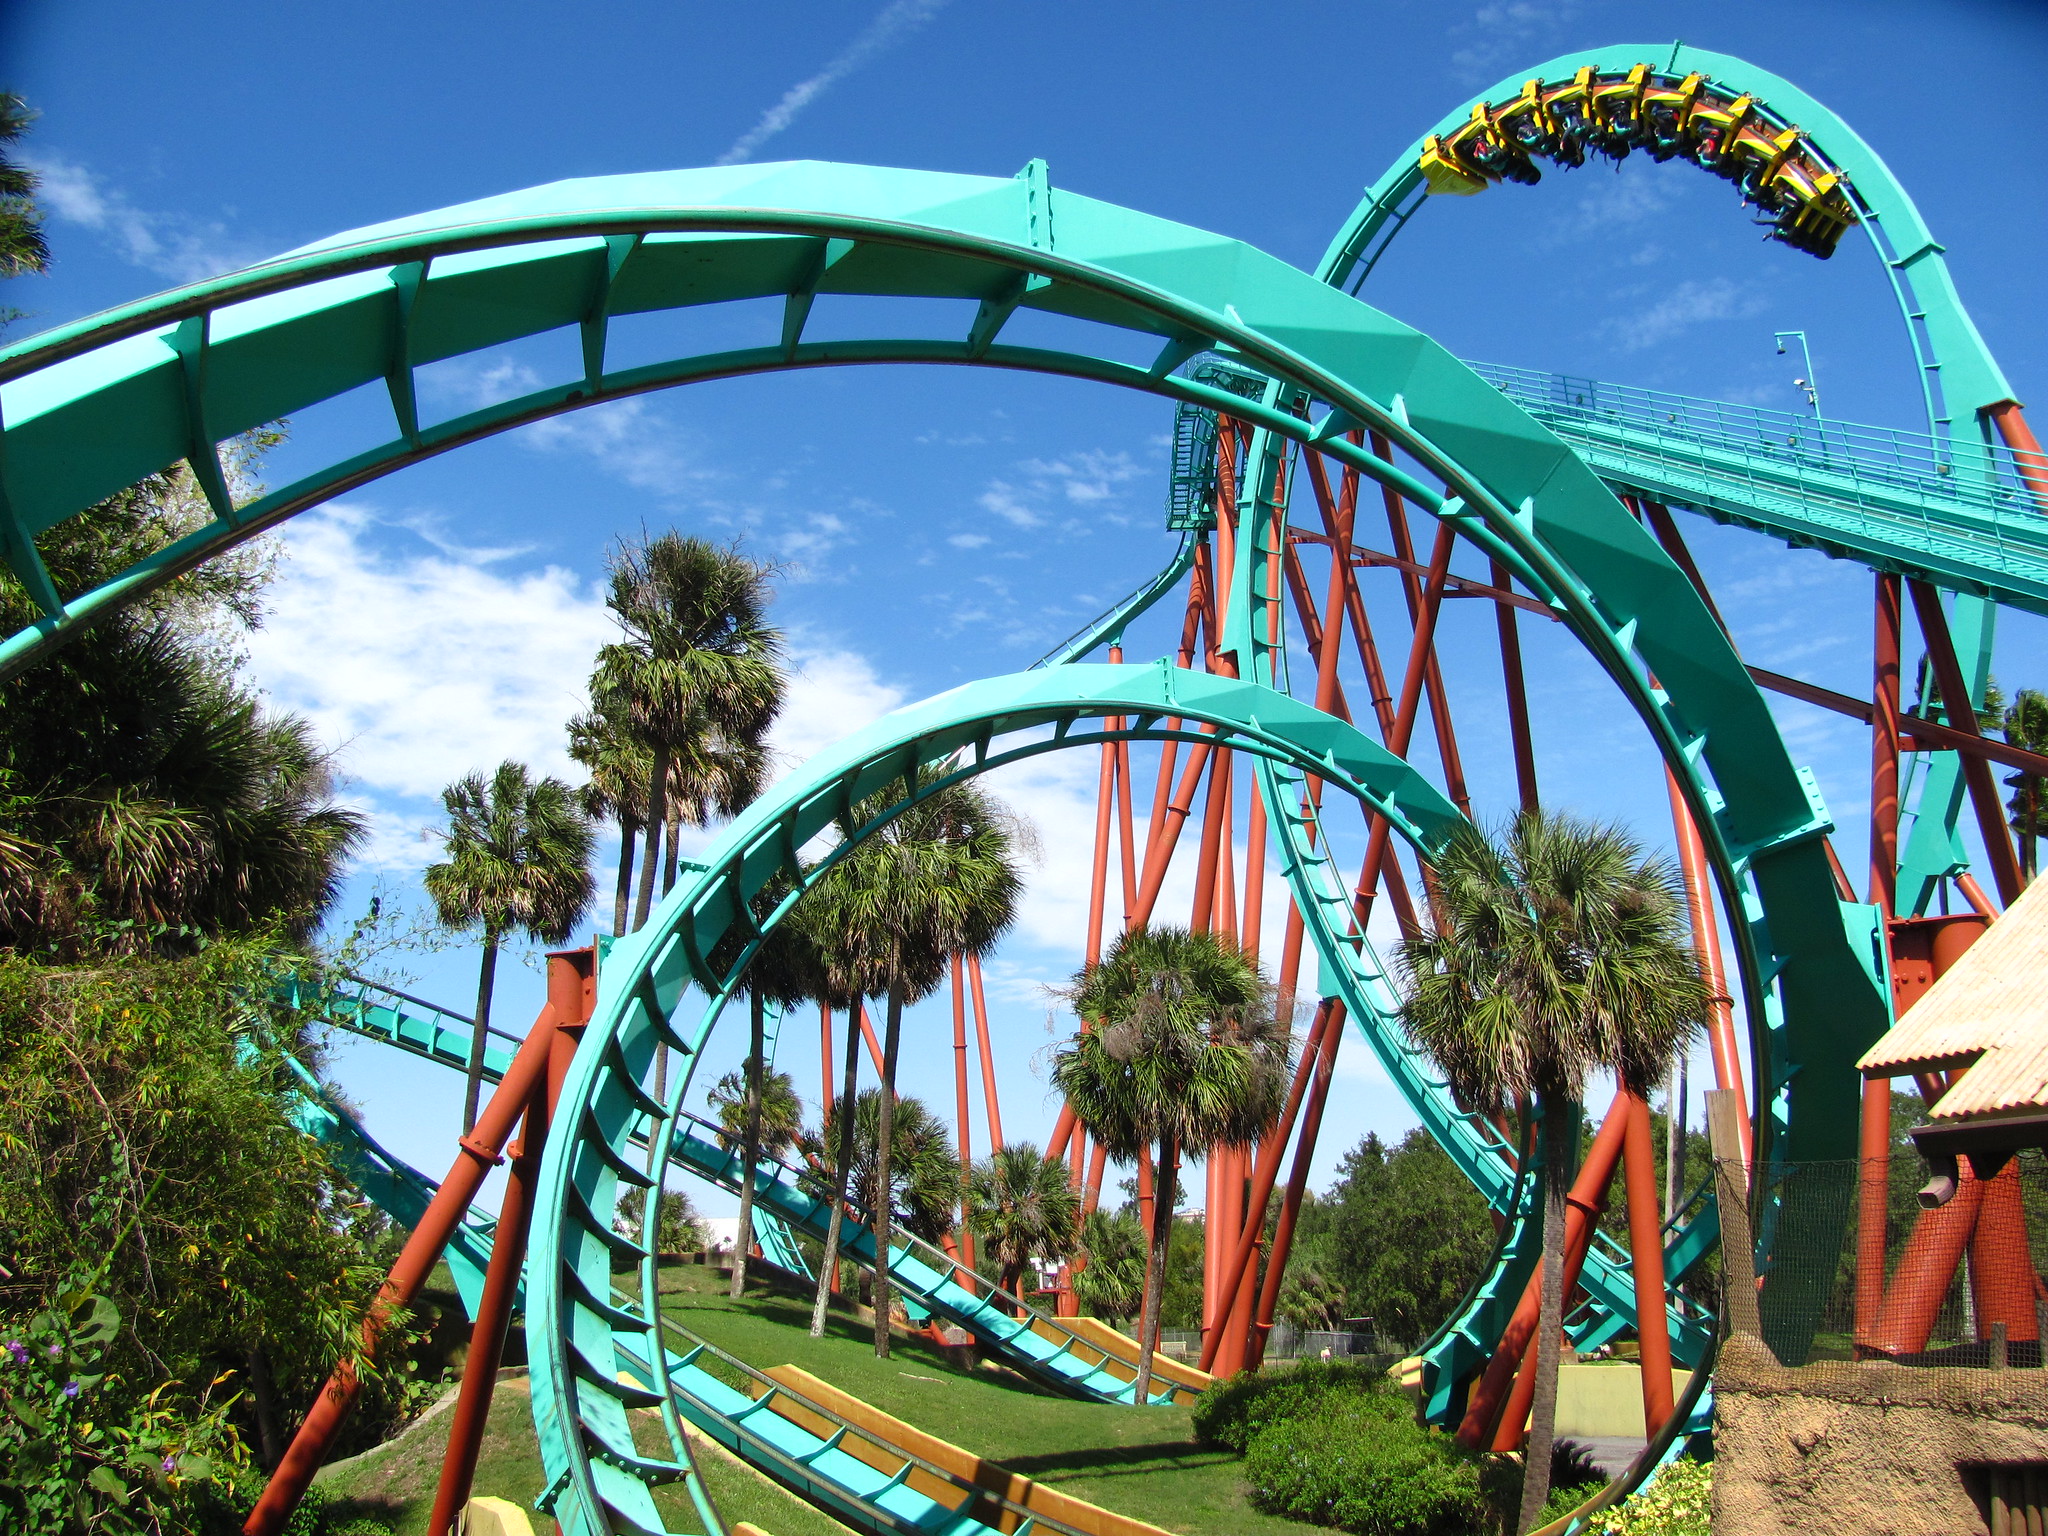 <p>This African theme park is one of Tampa’s most popular tourist attractions. It’s also <strong>one of the largest zoos in North America</strong>.</p>  <p> As well as standard enclosures which are home to animals like lions, tigers, and gorillas, people can also go on a safari ride to see animals like zebras, giraffes, and rhinos roaming free.</p>